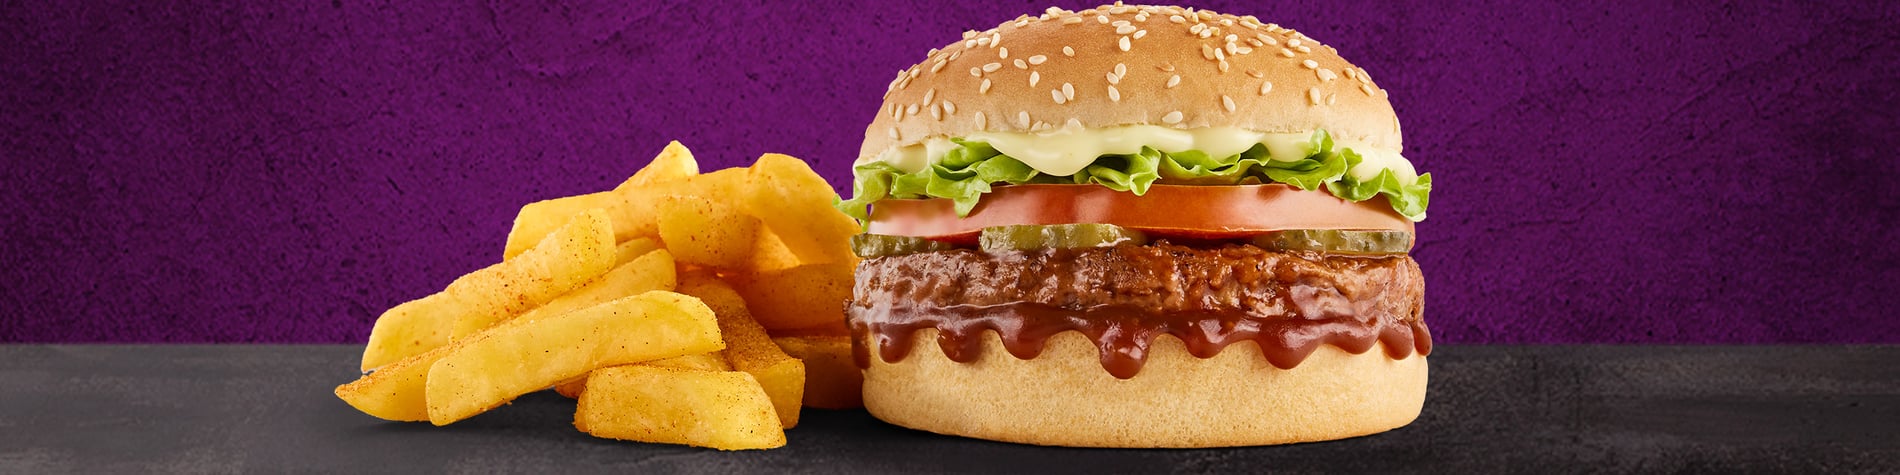 The NEW Mo’MjojoTM Burger Meal from Steers® Engen Mount Ayliff. 2 Flame-Grilled pure beef patties, pineapple, macon, tomato, lettuce, and small Famous Hand-Cut Chips, on a purple background.